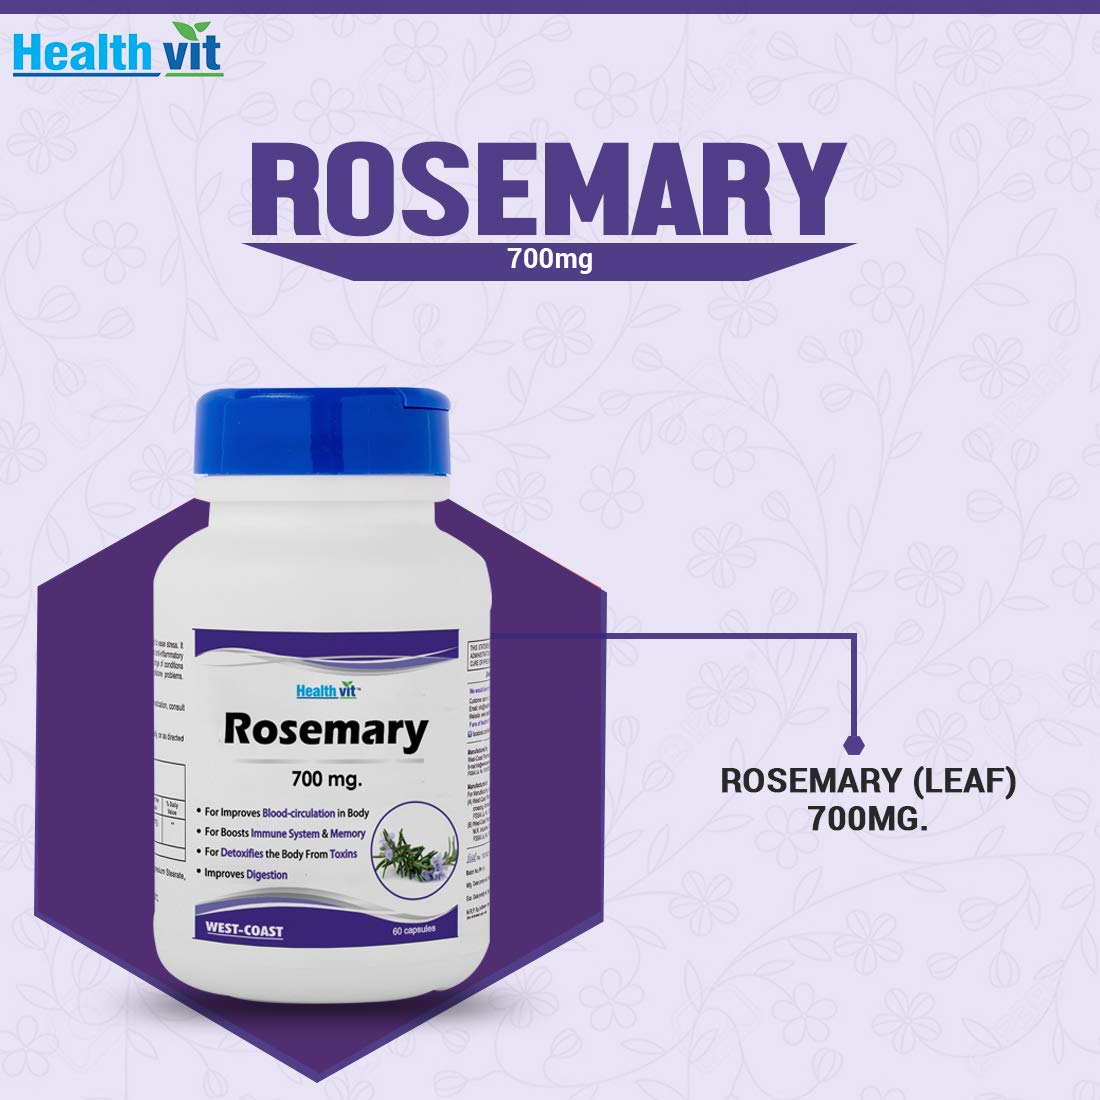 Healthvit Rosemary 700mg - For Proper Blood Circulation | Boost Immune System And Memory | Detoxifies The Body From Toxins | Improves Digestion | 60 Capsules